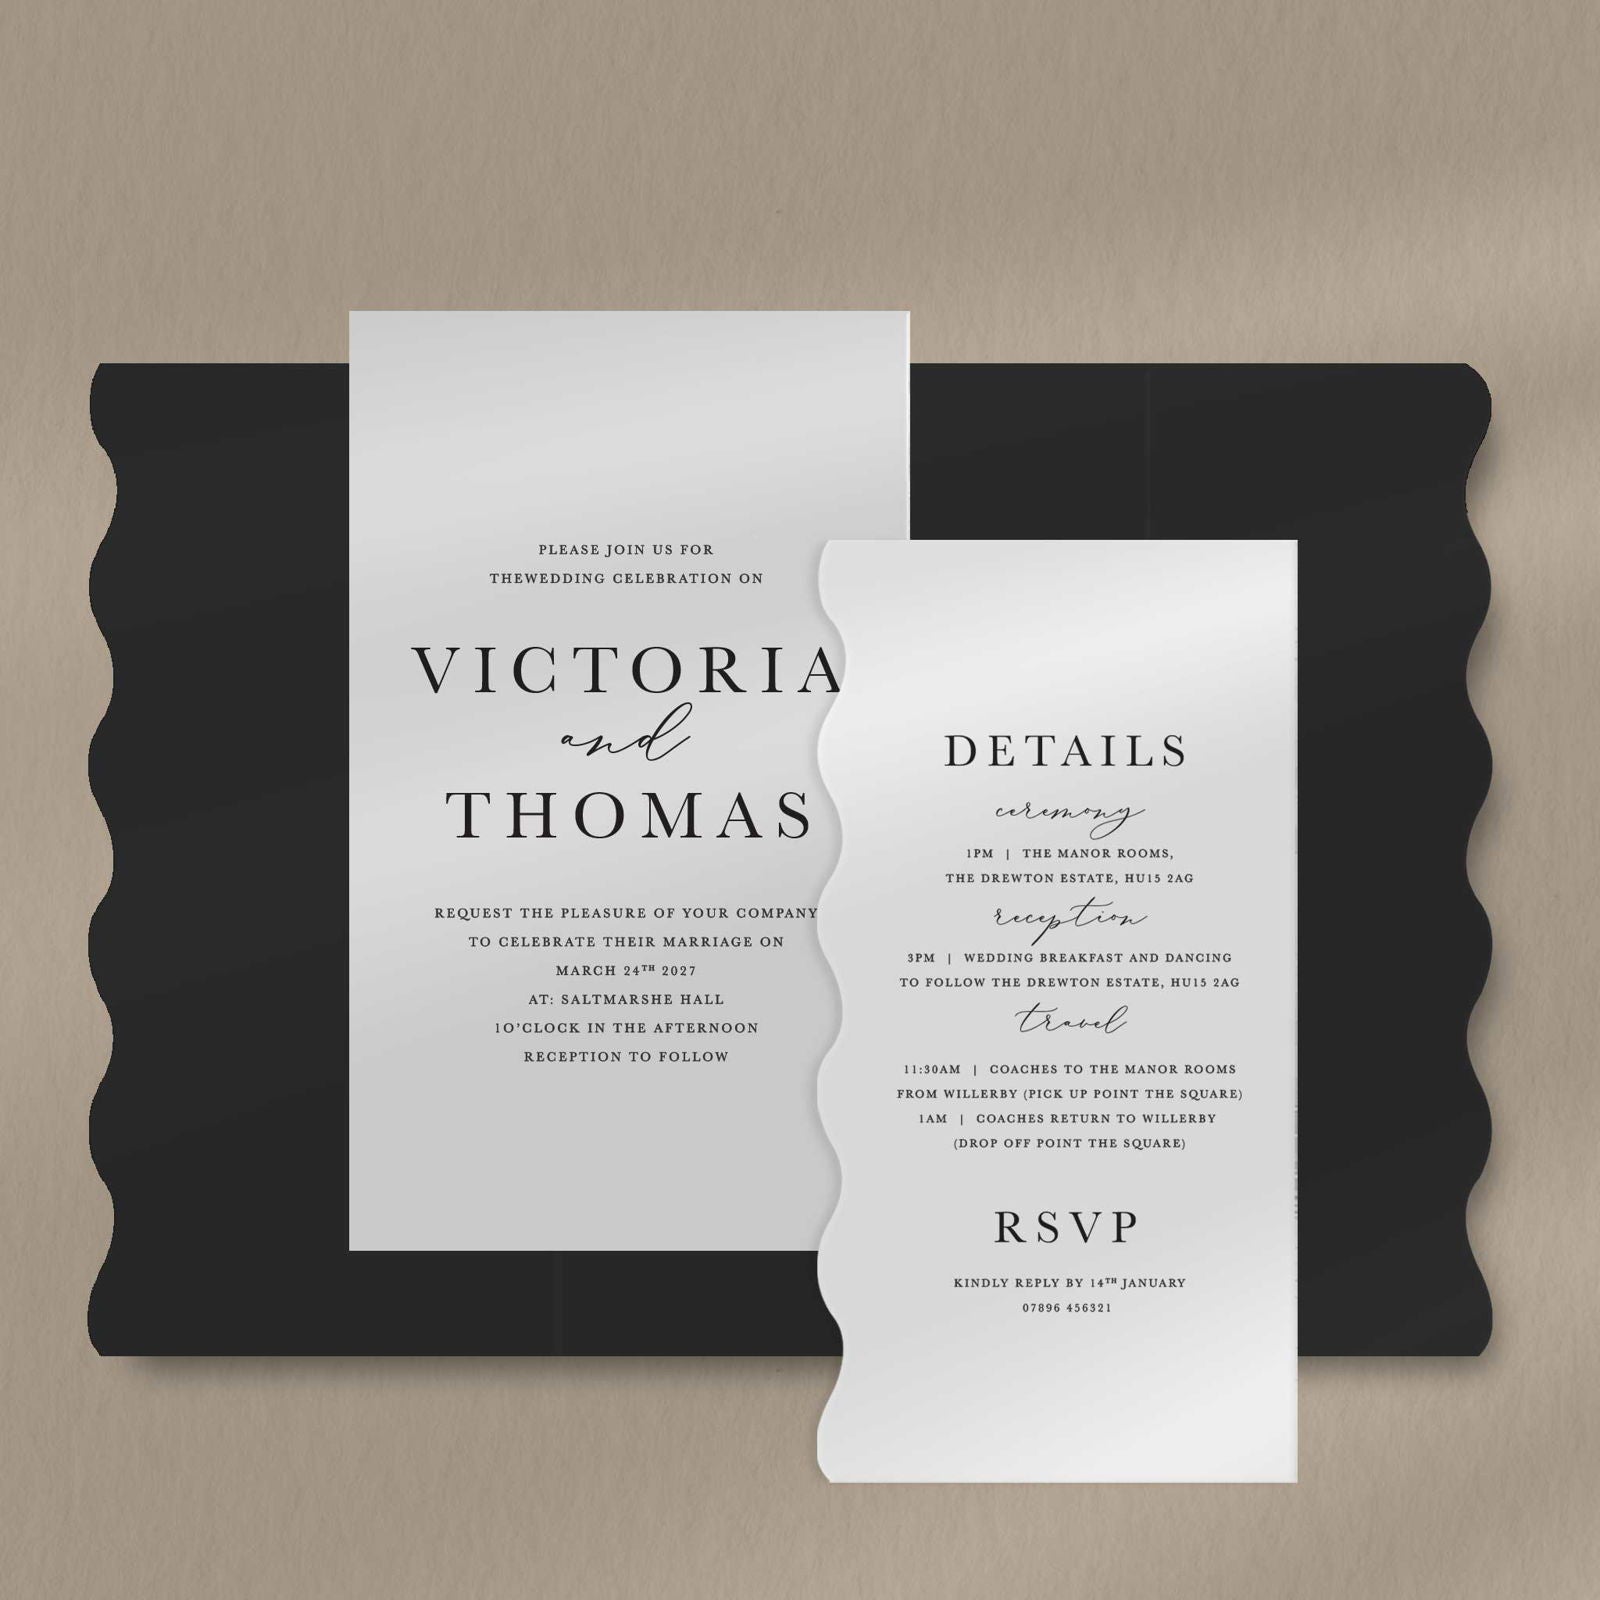 Victoria | Formal Wedding Invitations - Ivy and Gold Wedding Stationery -  